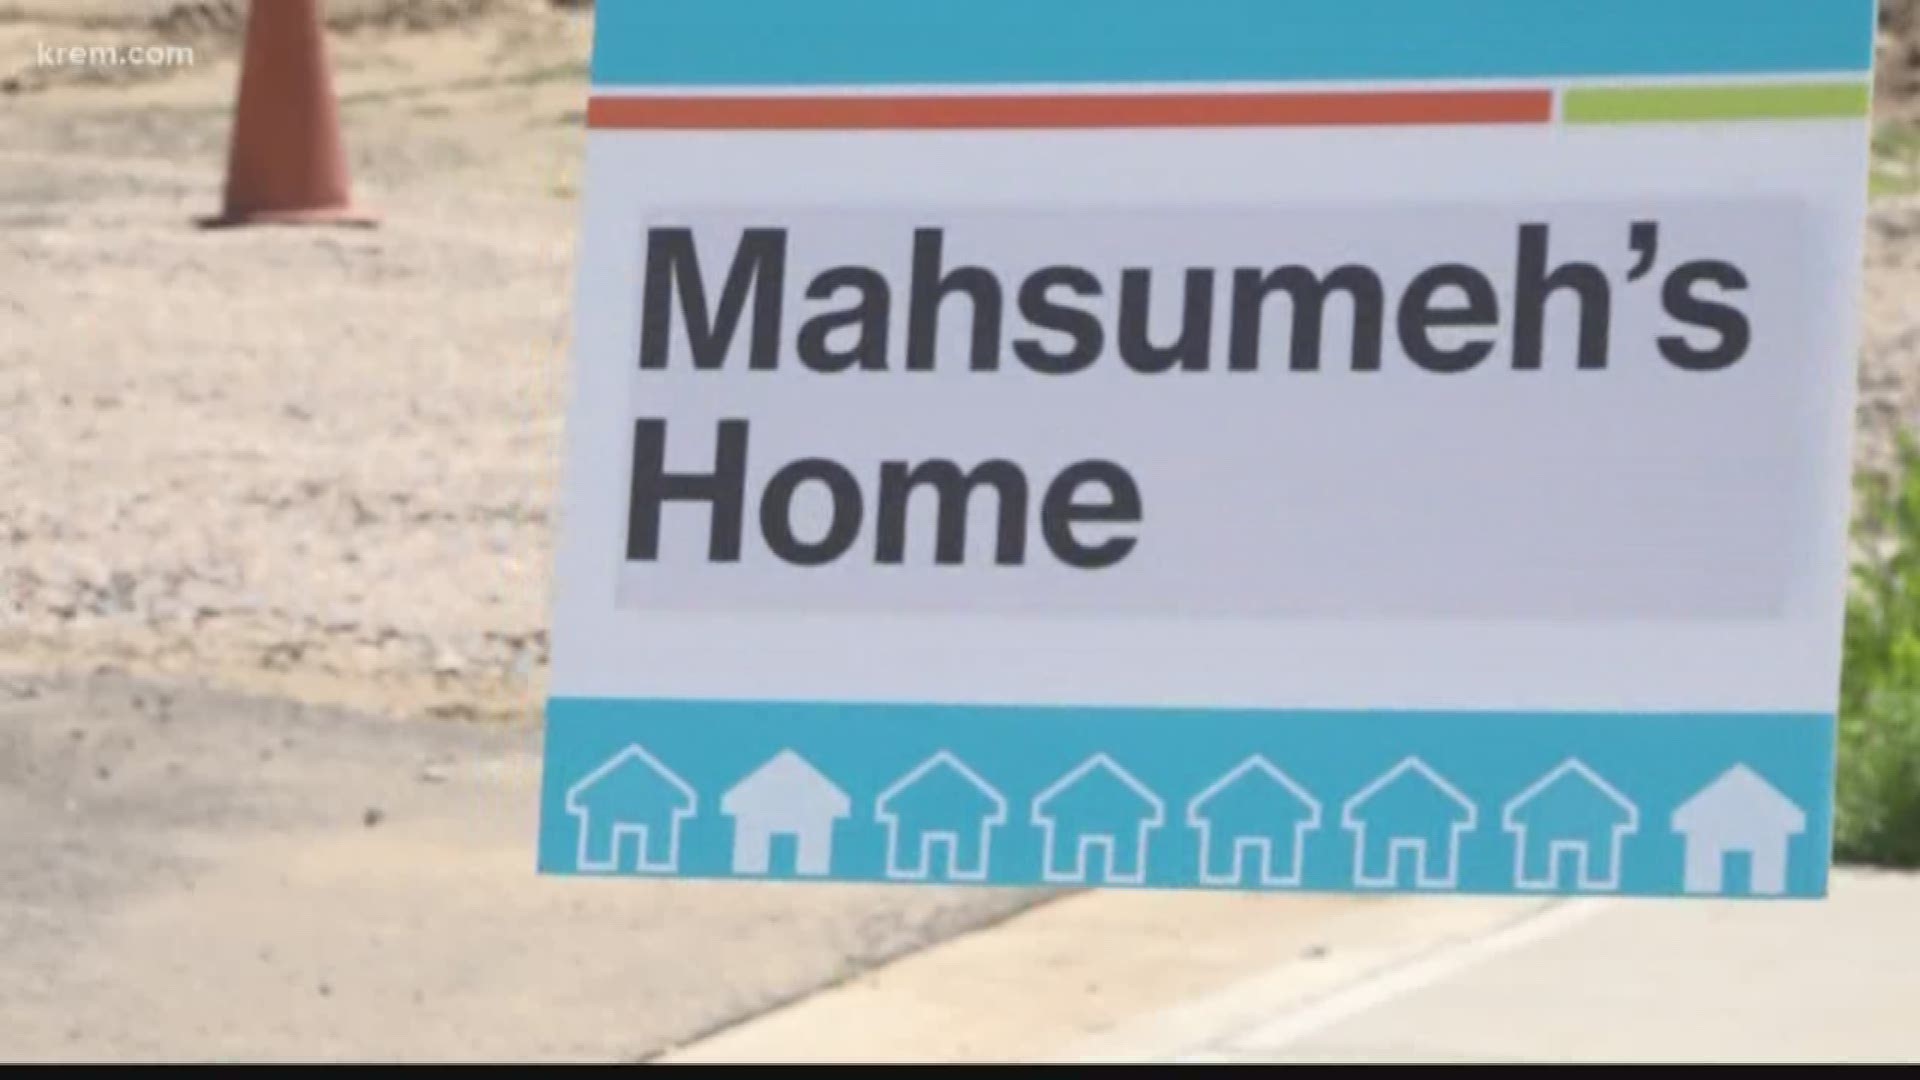 Two families in the Deer Park area just got the keys to their new homes. Both families are new homeowners through what's called the Habitat for Humanity Blitz Build. It's a partnership that helps families involved with the organization have affordable housing. KREM 2's Shayna Waltower tells us more about this work and how it's changing lives.